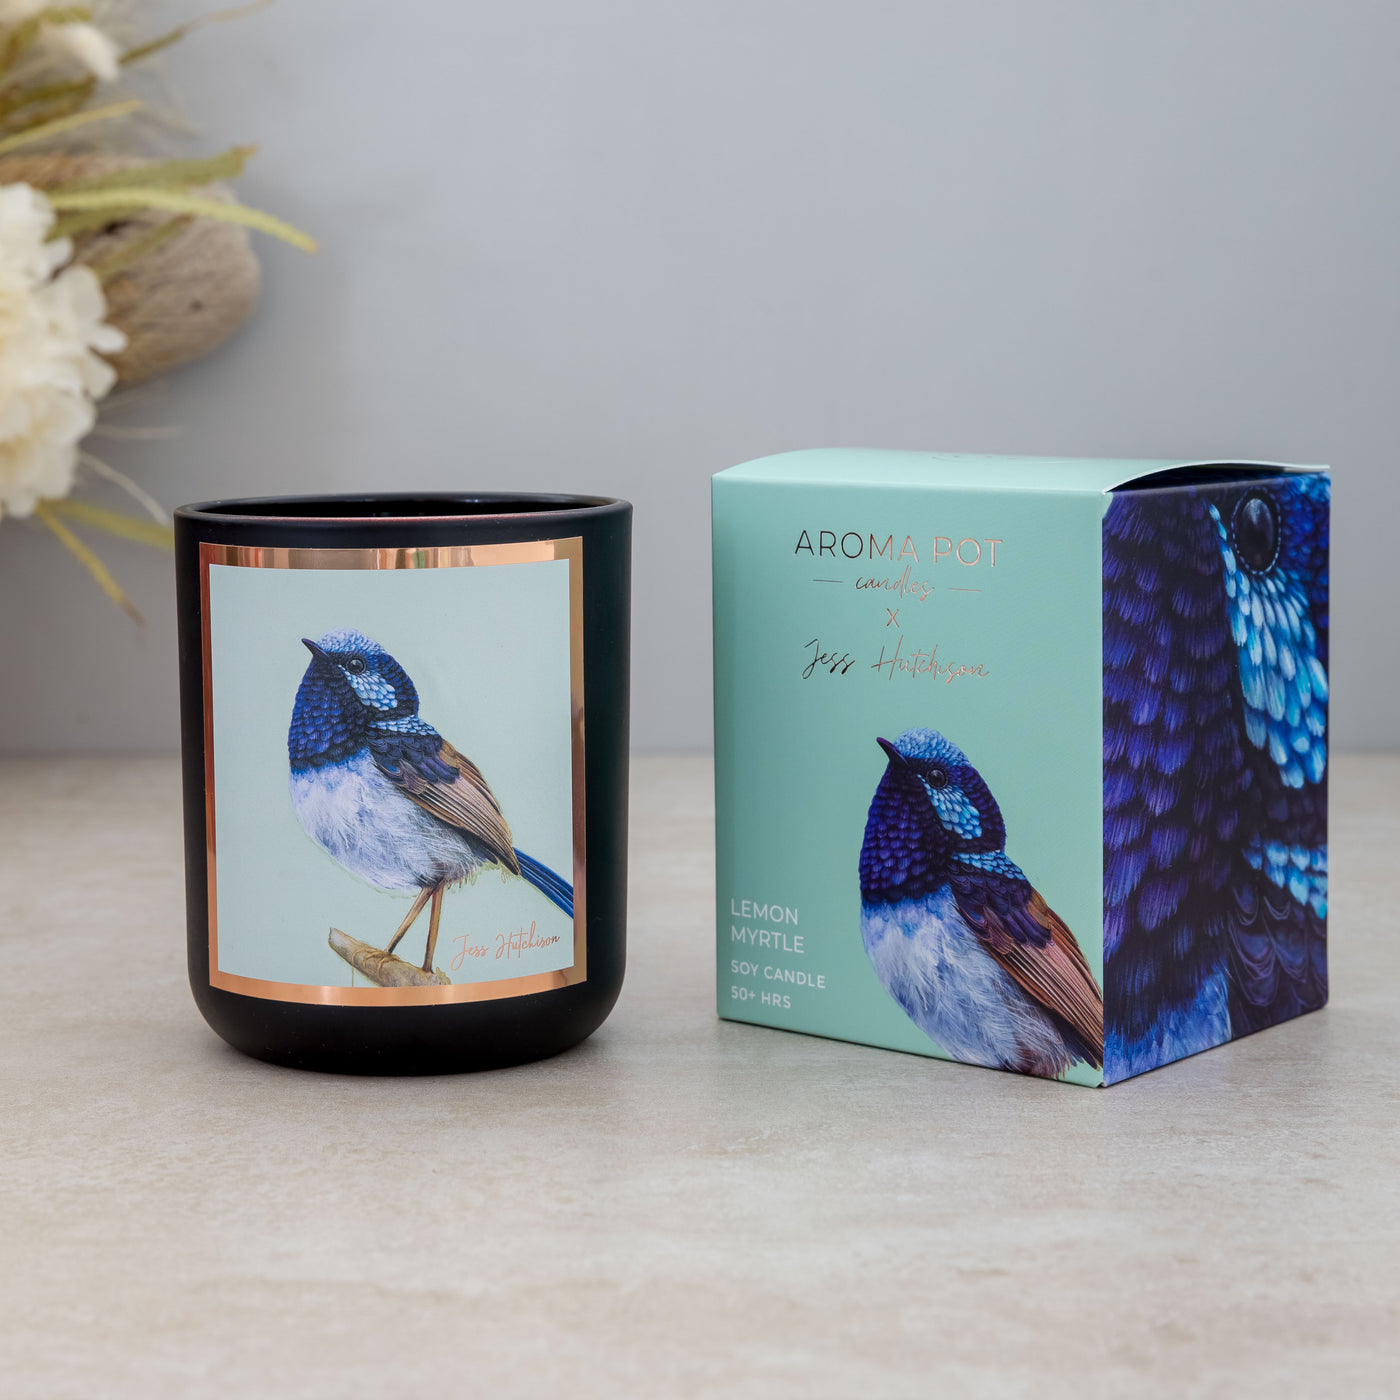 emon Myrtle scented soy candle collab with Australian artist Jess Hutchison gift box hand poured Barossa Adelaide South Australia available for stockists wholesale